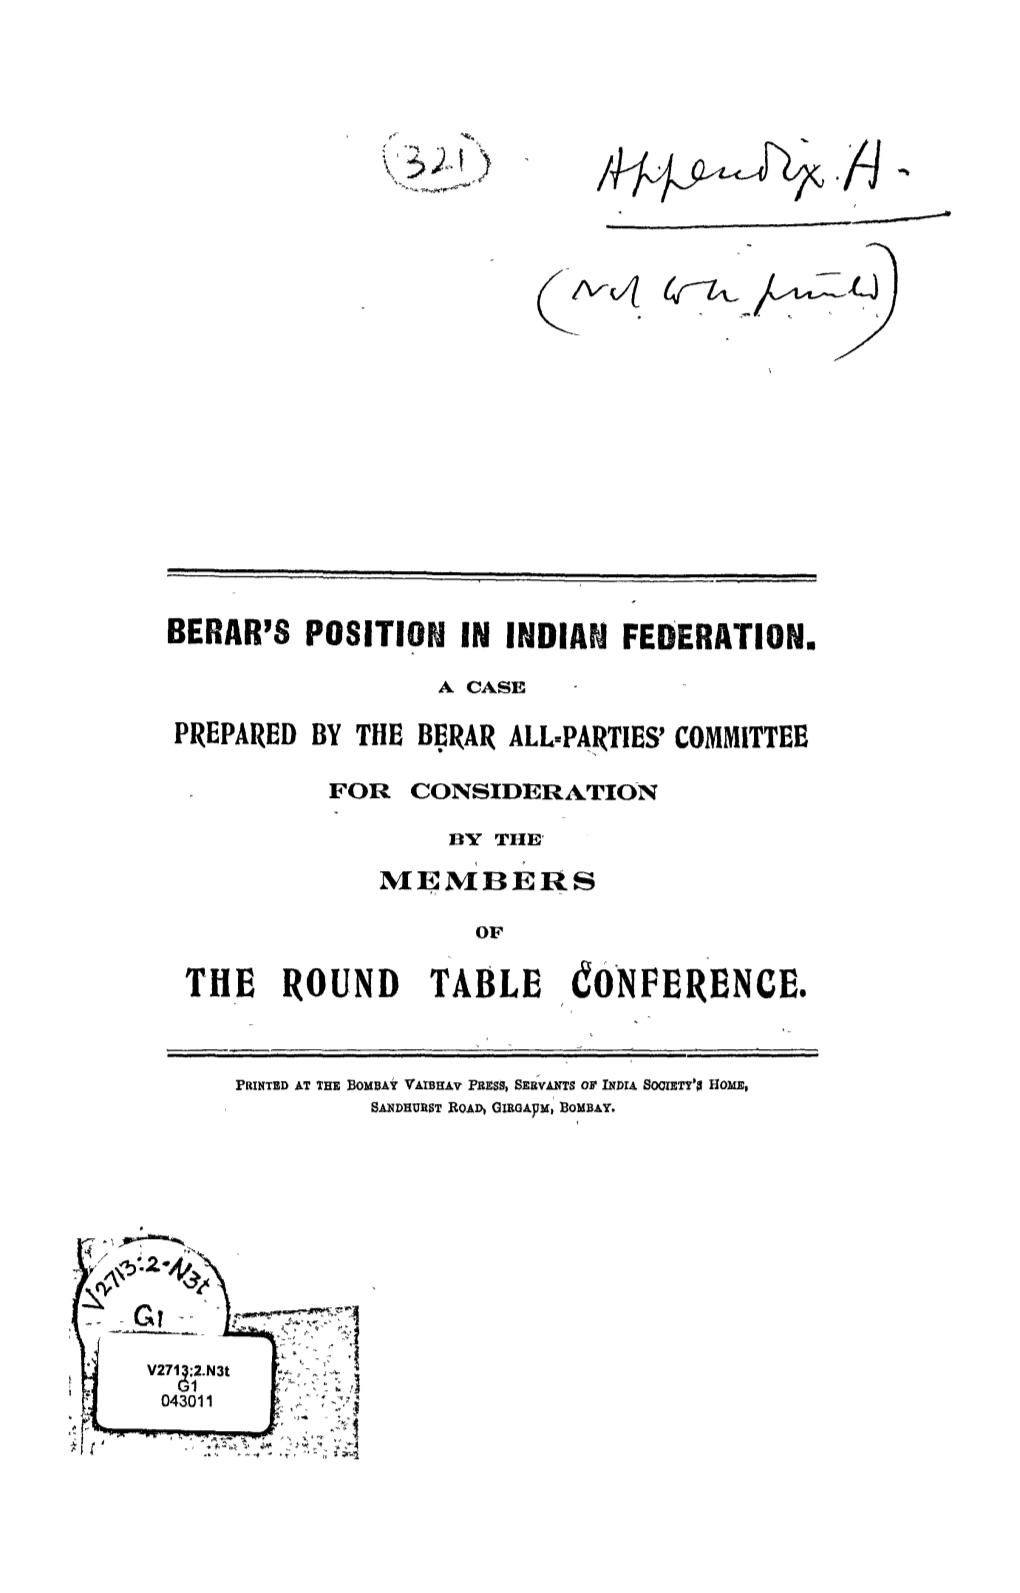 Berar's Position in Indian Federation